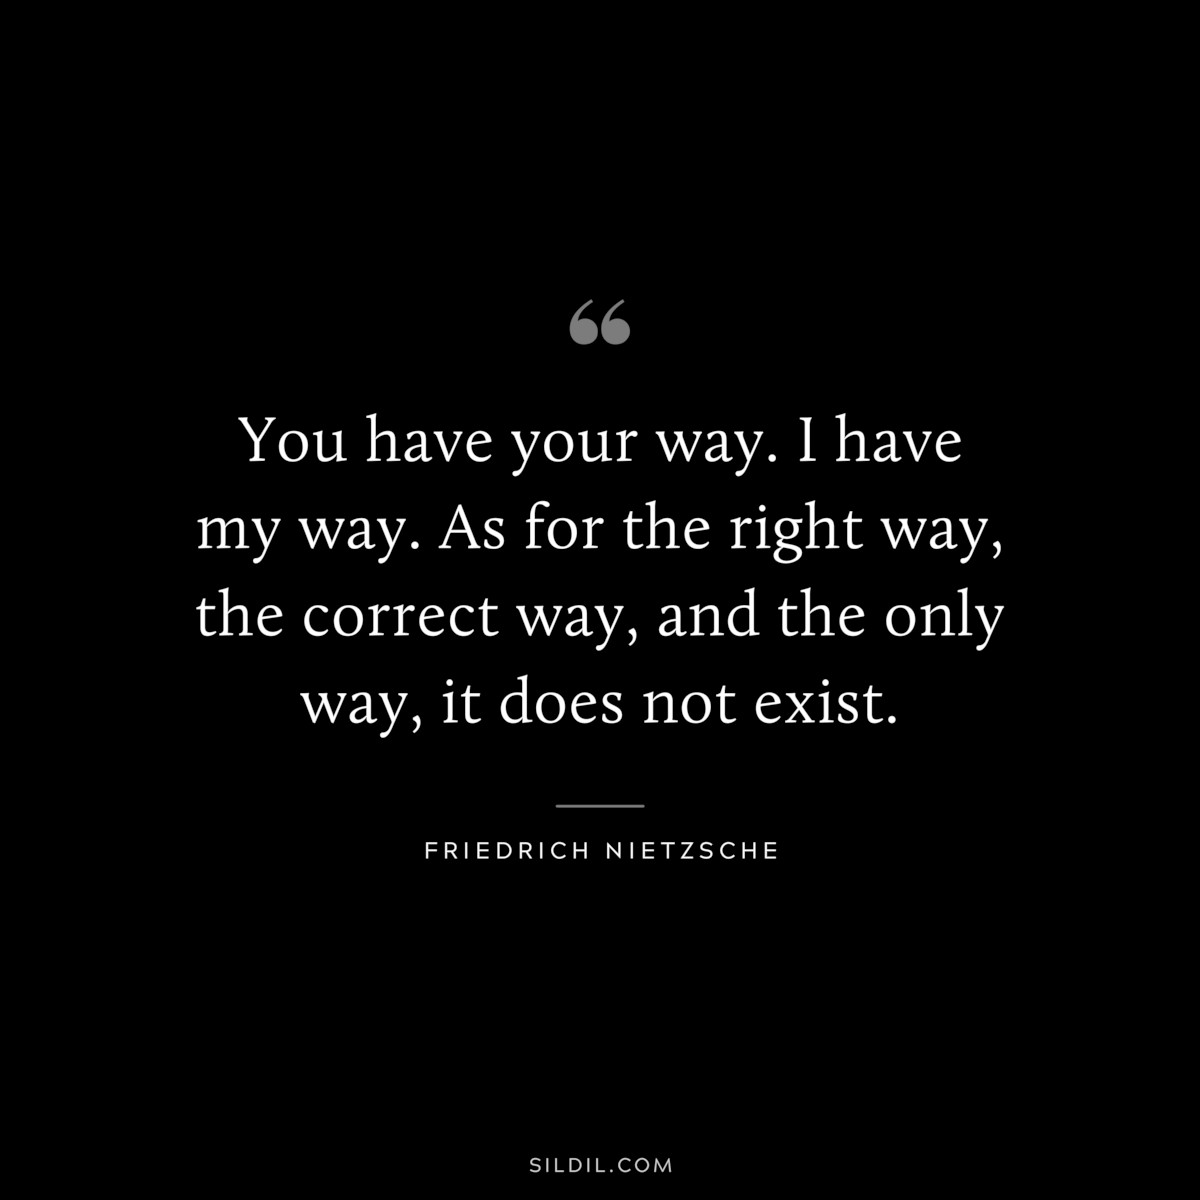 You have your way. I have my way. As for the right way, the correct way, and the only way, it does not exist. ― Friedrich Nietzsche